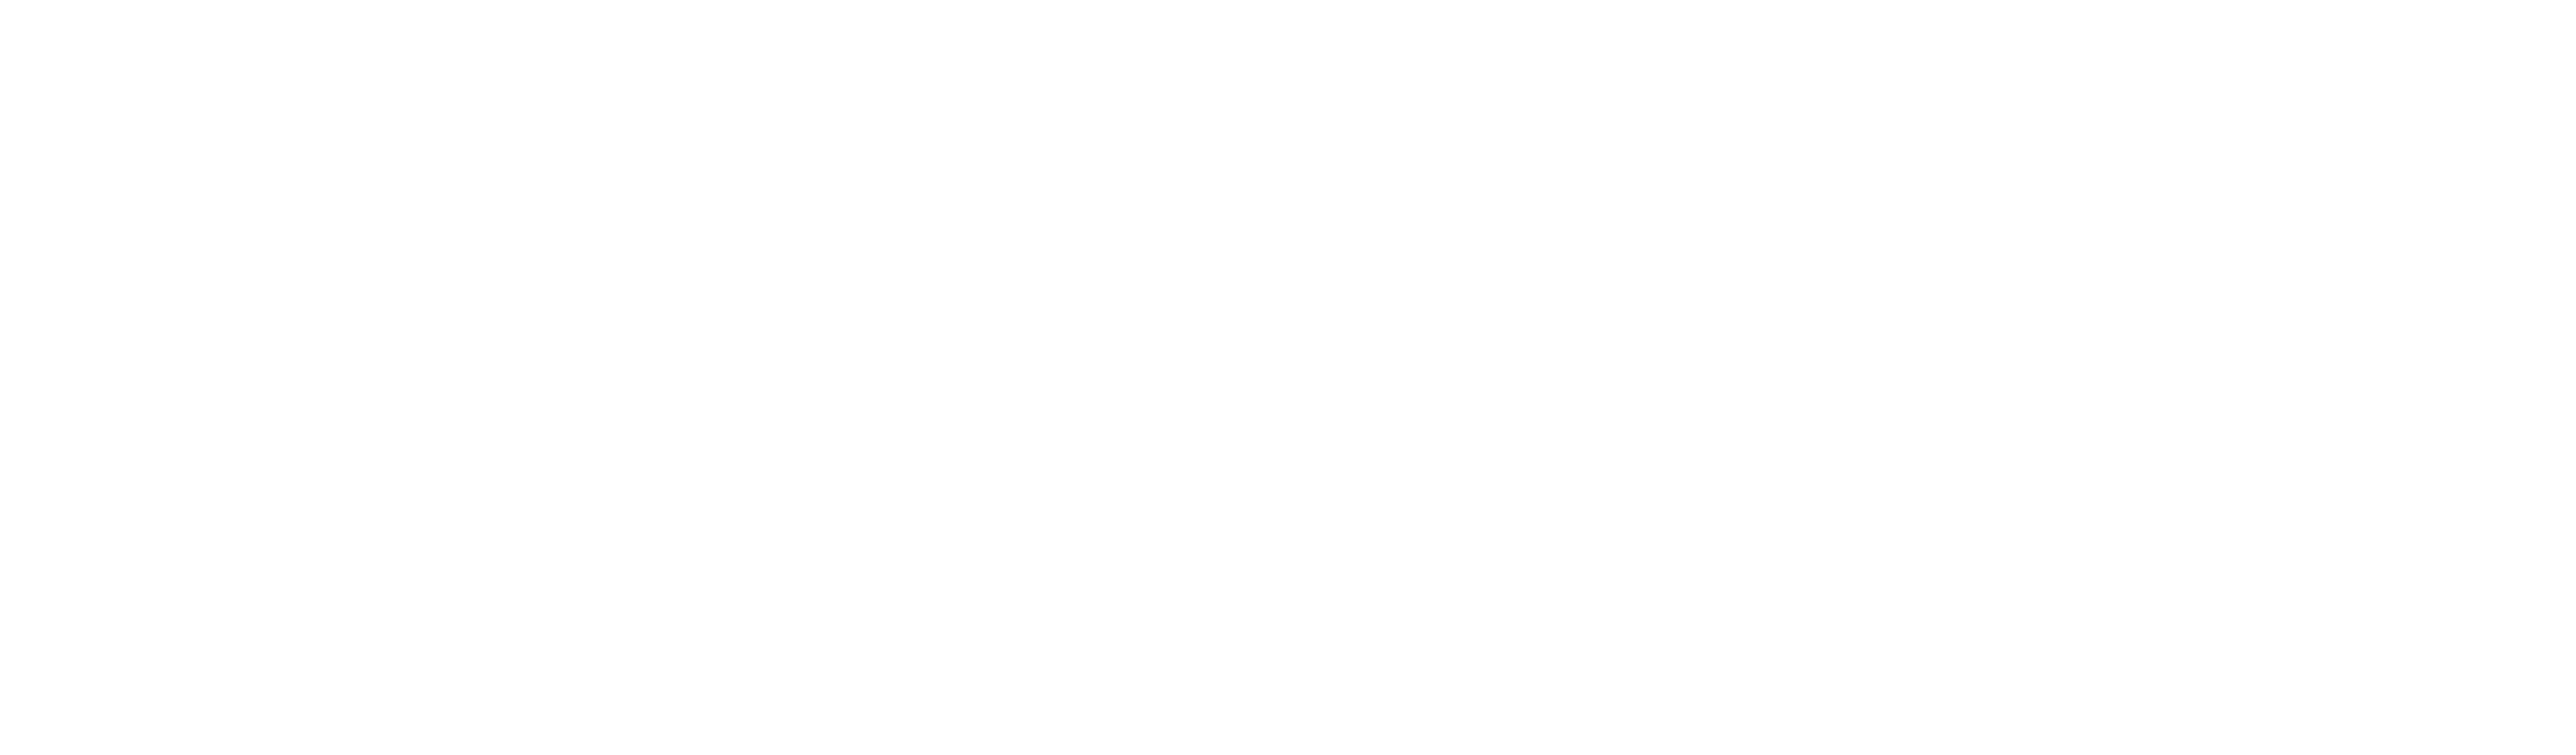 Thuisbezorgd.nl for business